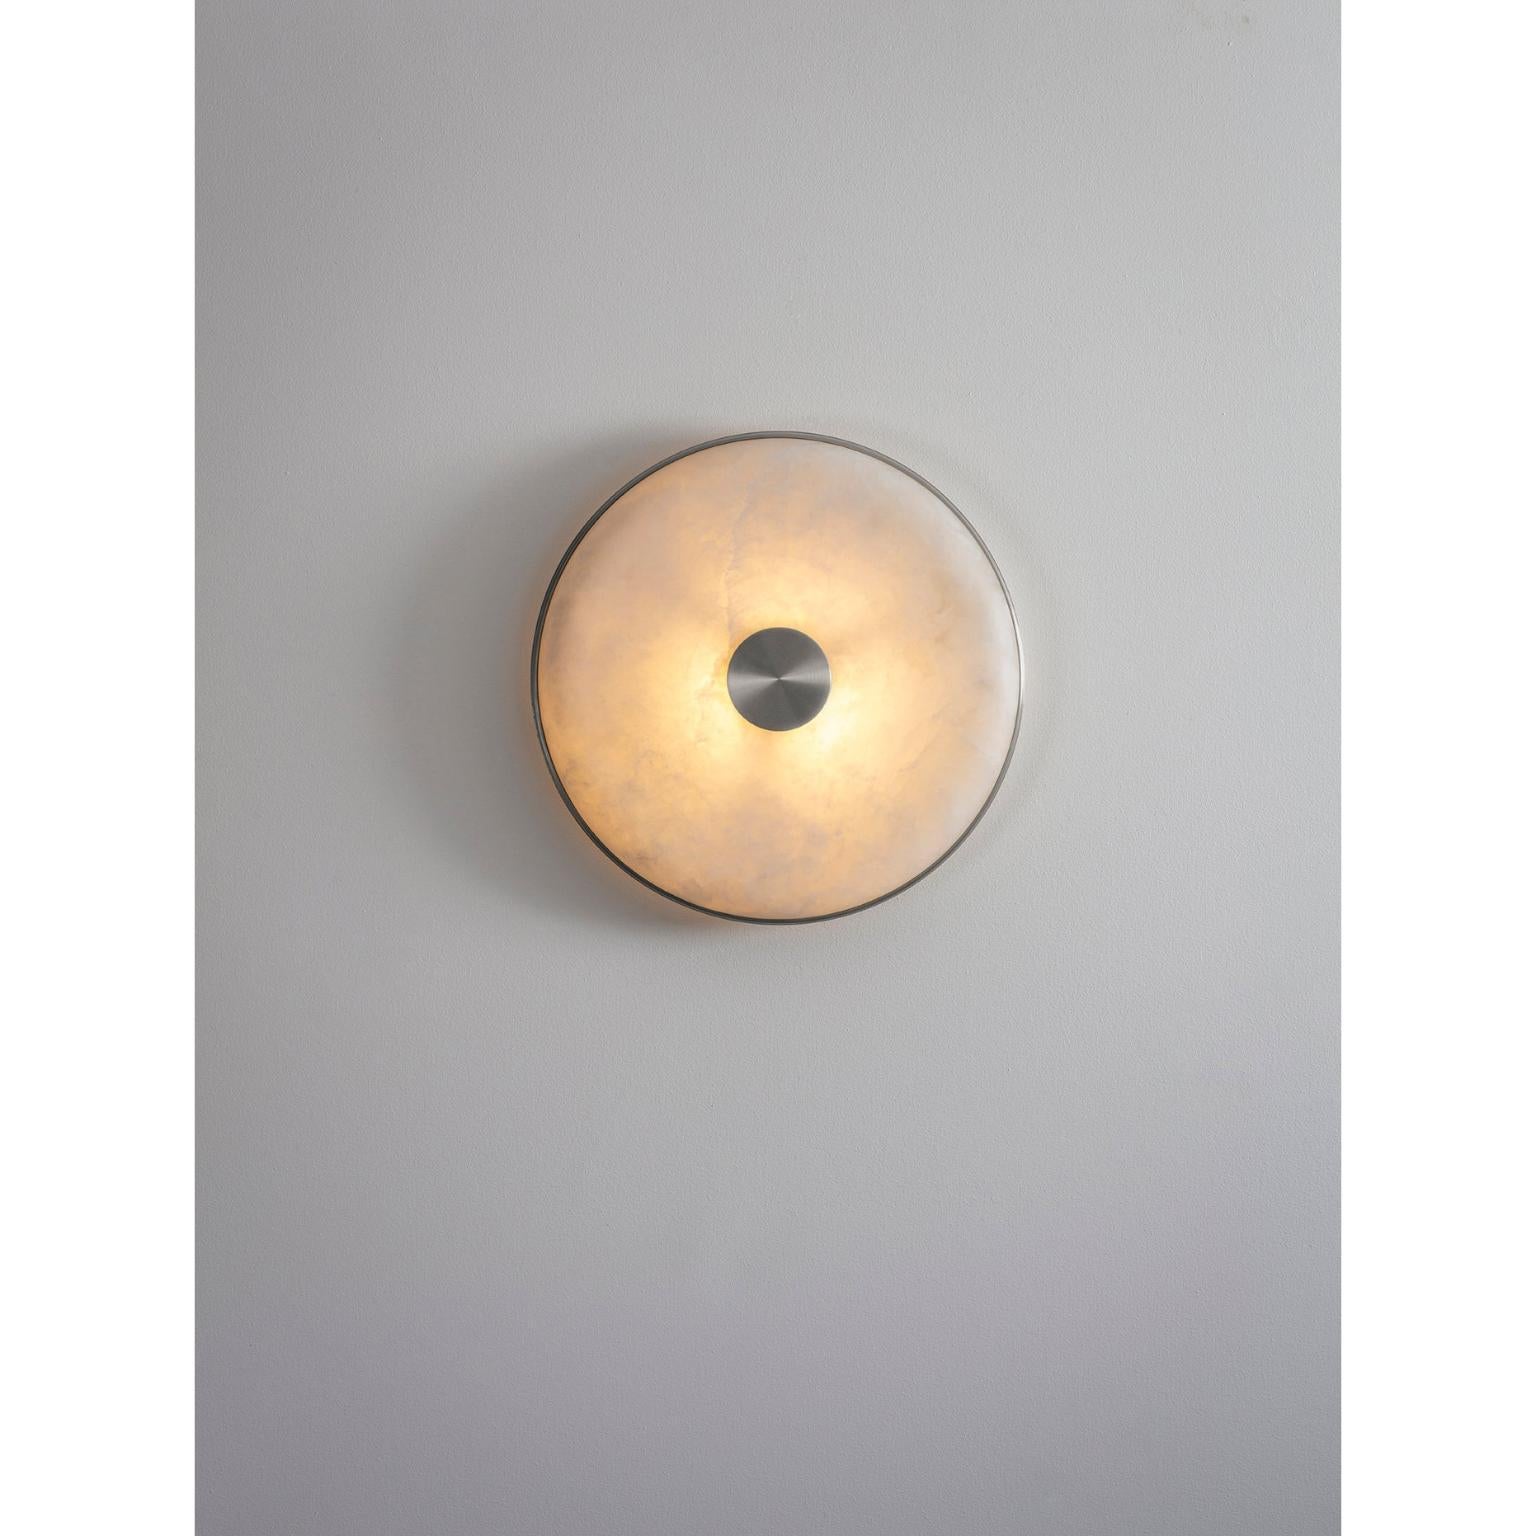 Beran Satin Nickel Large Wall Light by Bert Frank
Dimensions: D 6,5 x W 36 x H 36 cm.
Materials: Satin nickel and alabaster.

Available in two different sizes. Available in different finishes and materials. Please contact us. 

Simple and elegant in